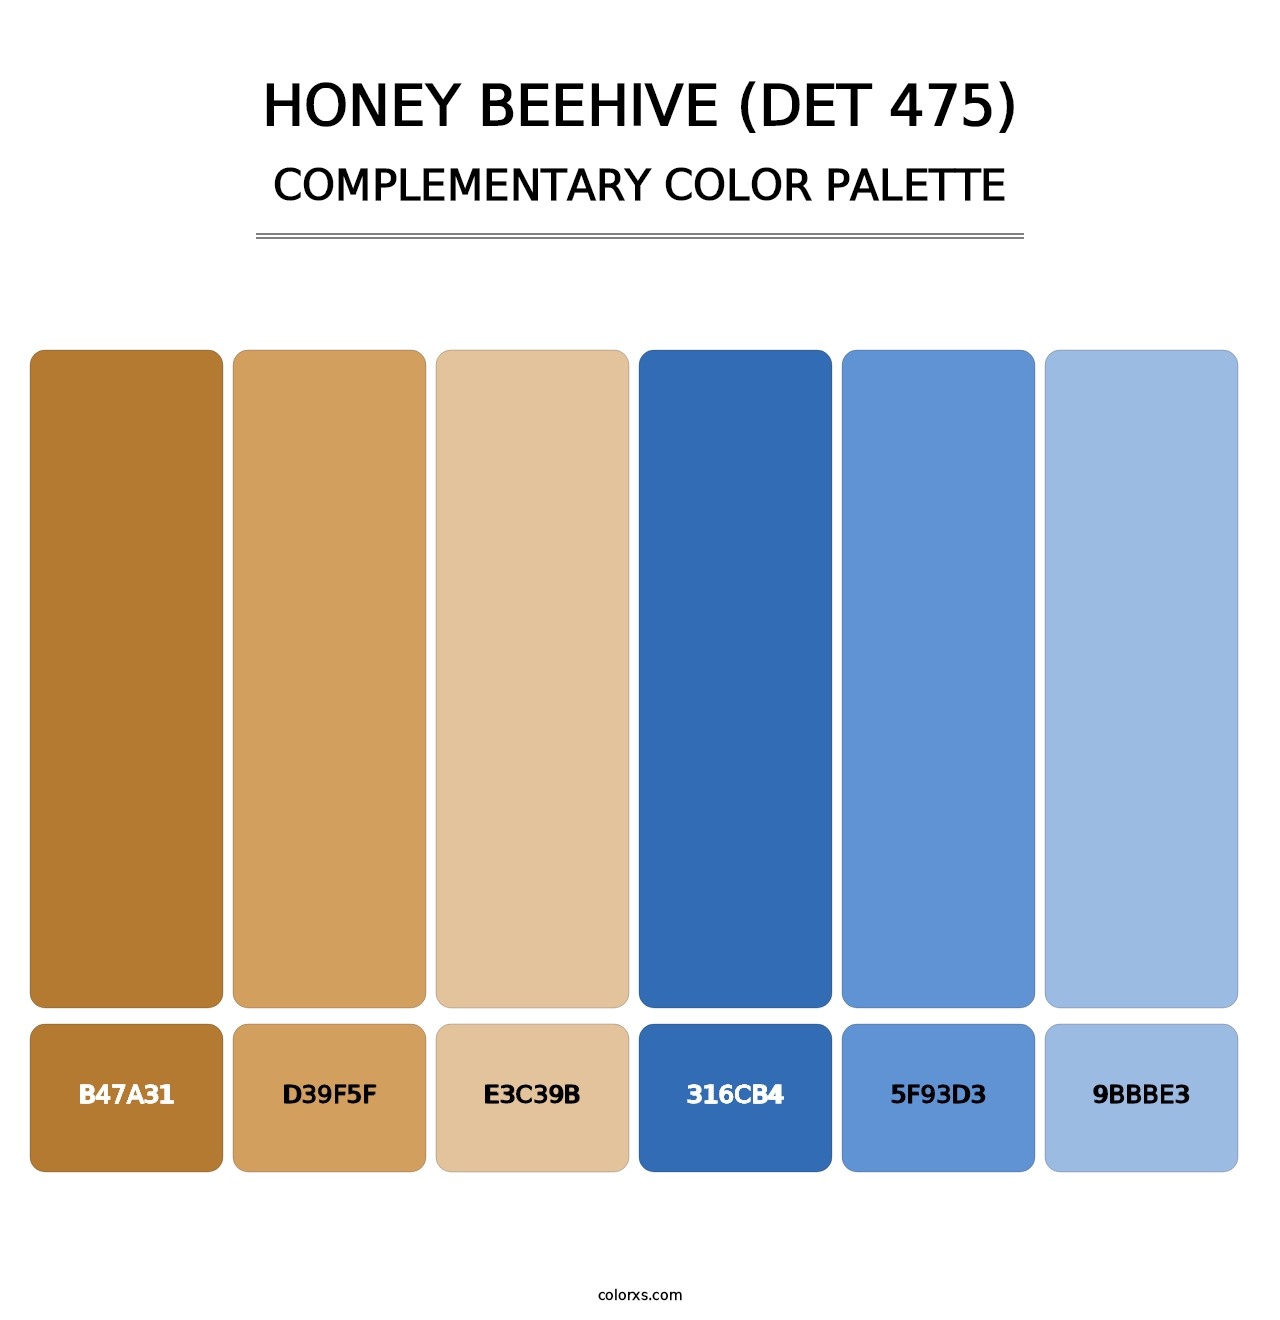 Honey Beehive (DET 475) - Complementary Color Palette